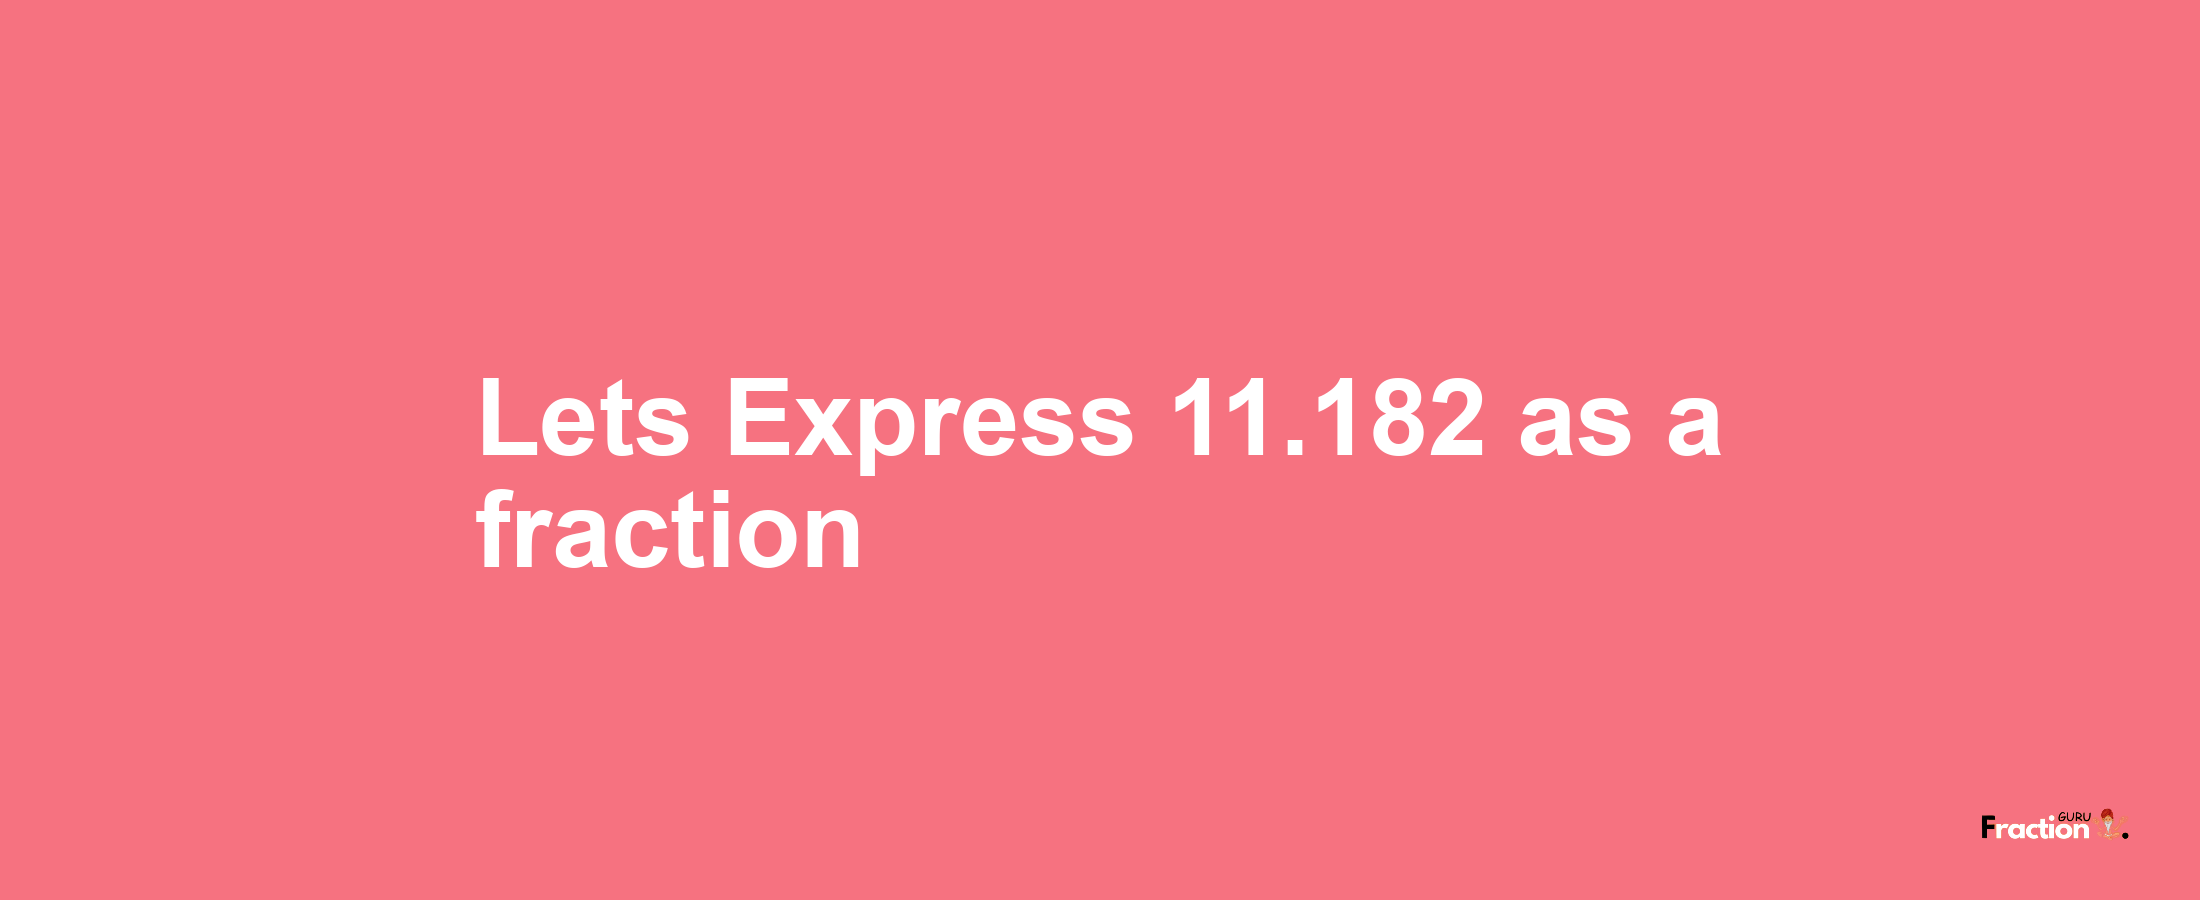 Lets Express 11.182 as afraction